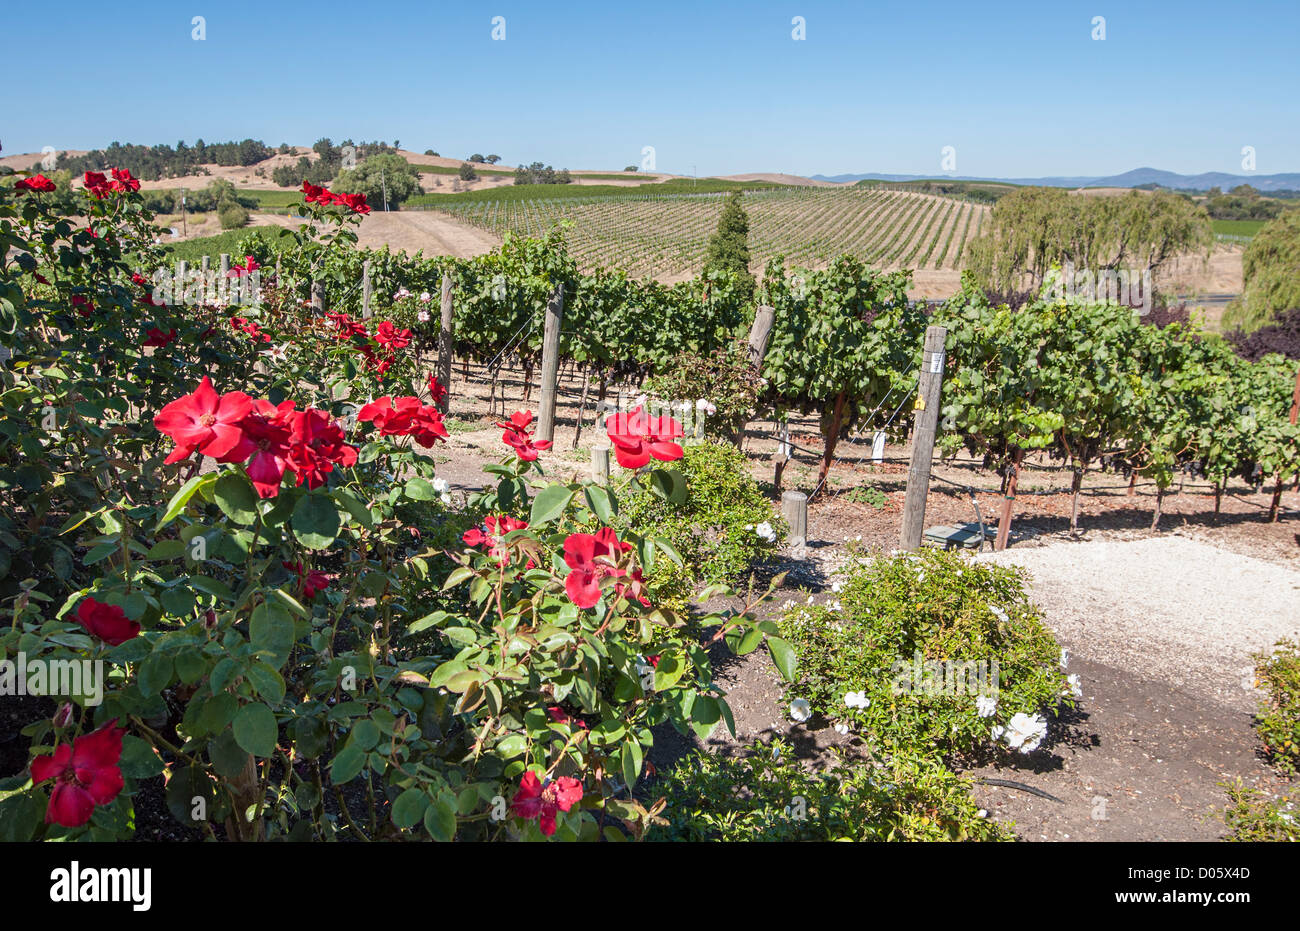 Beautiful view from the Domaine Carneros Winery and Vineyard in Napa Valley. Stock Photo